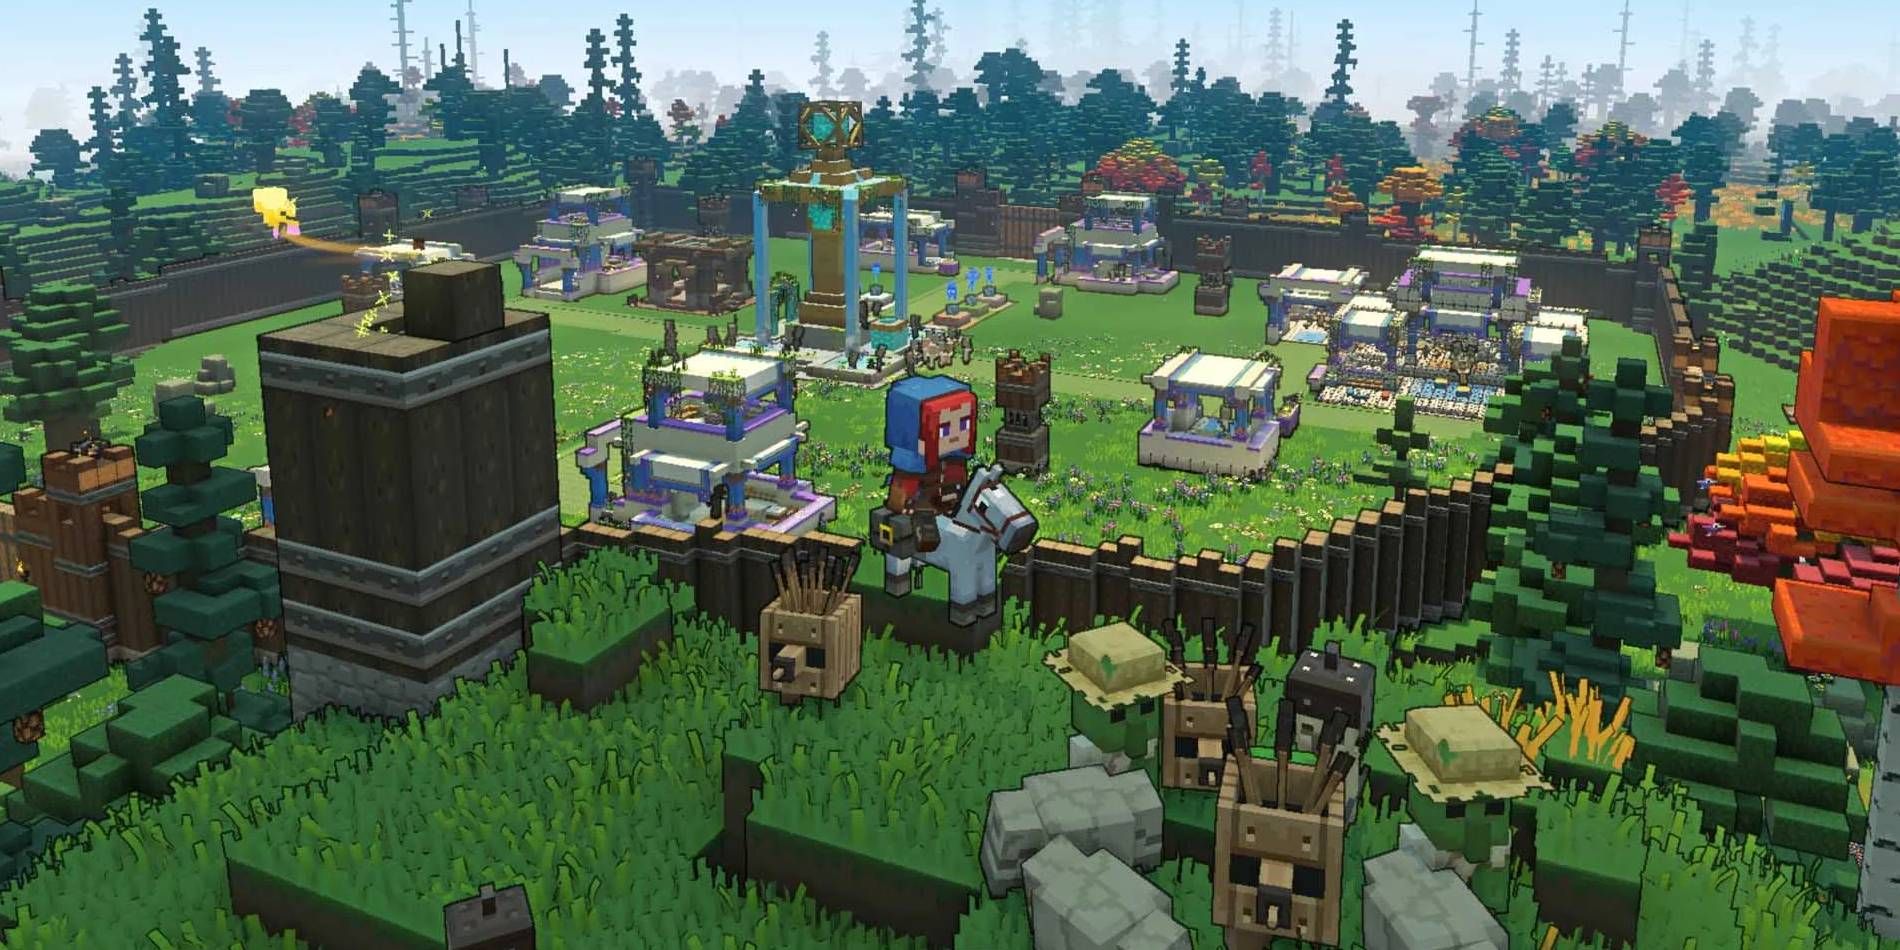 Minecraft Legends Player Village Base Improved with Walls, Defense Towers, Etc